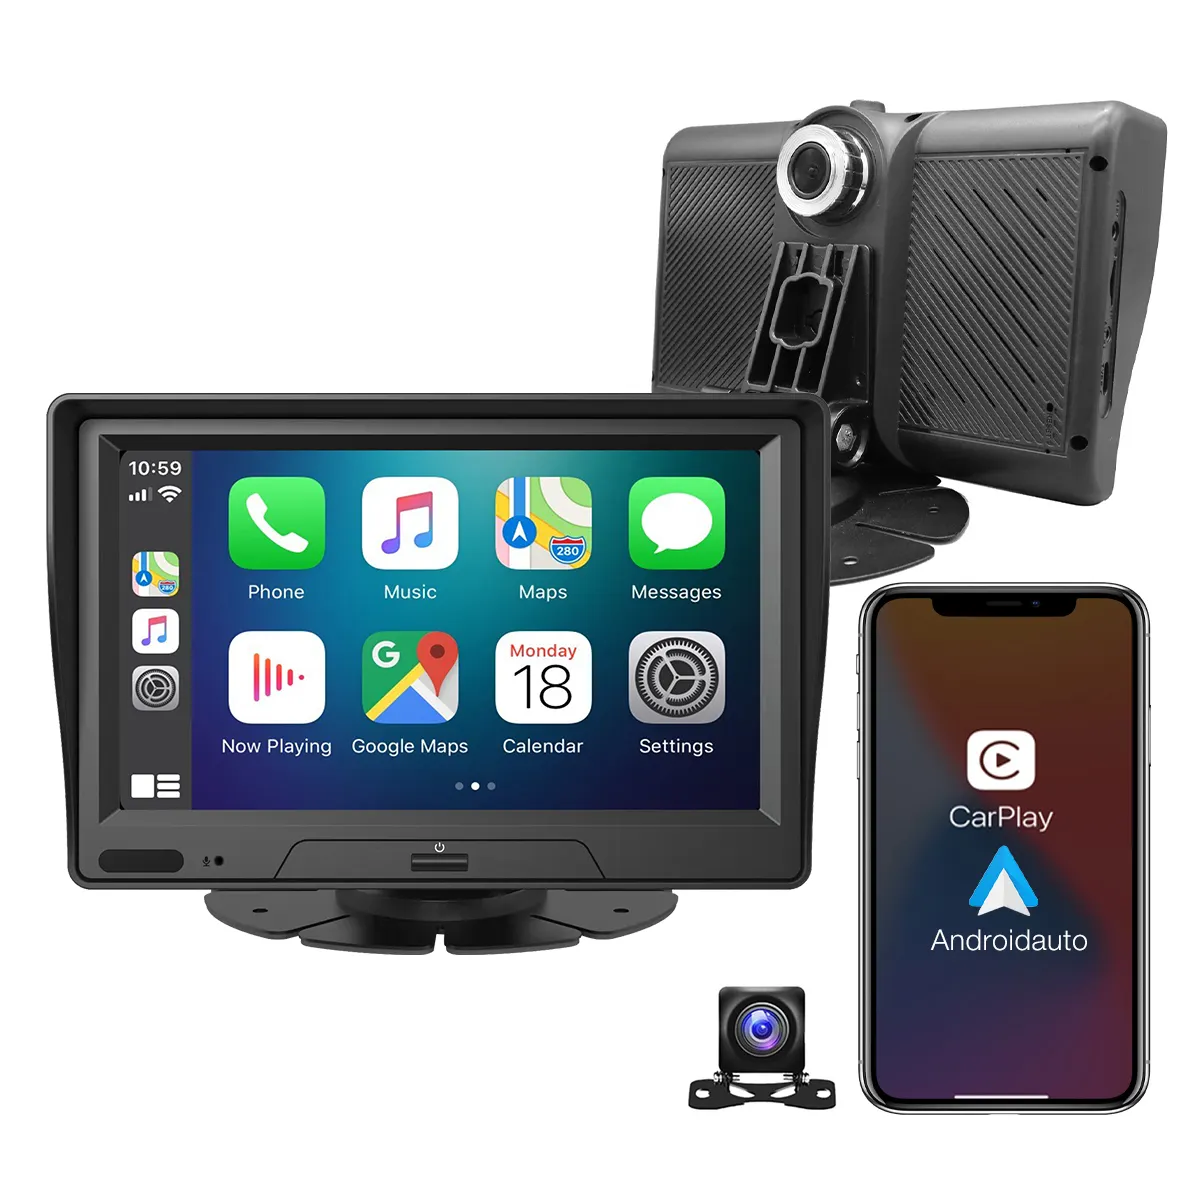 Carplay and Android Auto, 7'' IPS Touchscreen Multimedia Player with FM BT, SiriusXM, Google, Assistant Dashcam